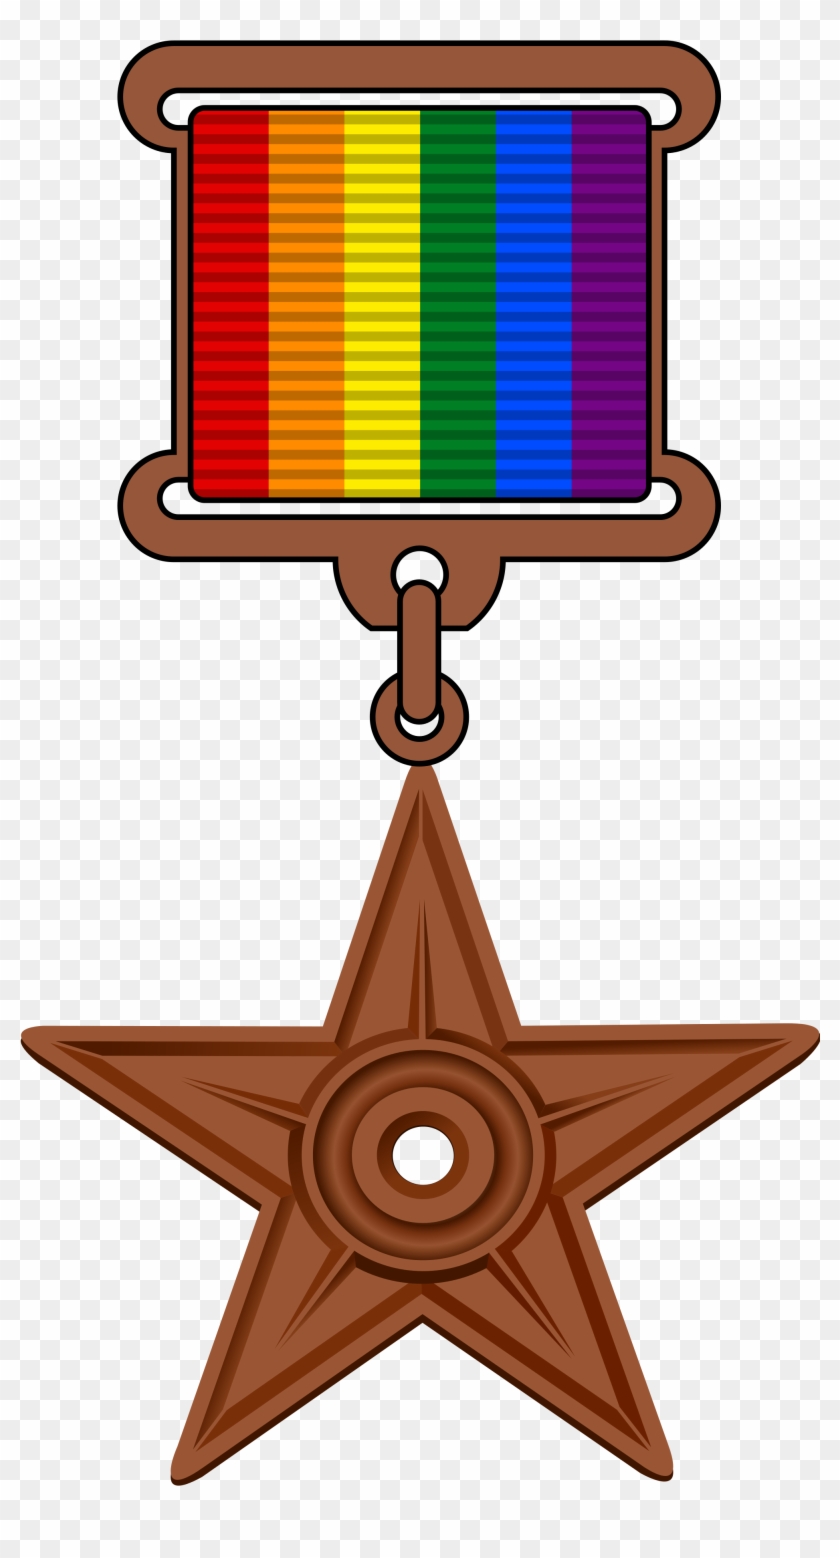 File Lgbt Svg Wikimedia Commons Open Ⓒ - File Saxophone 01 Svg Wikimedia Commons #1635772